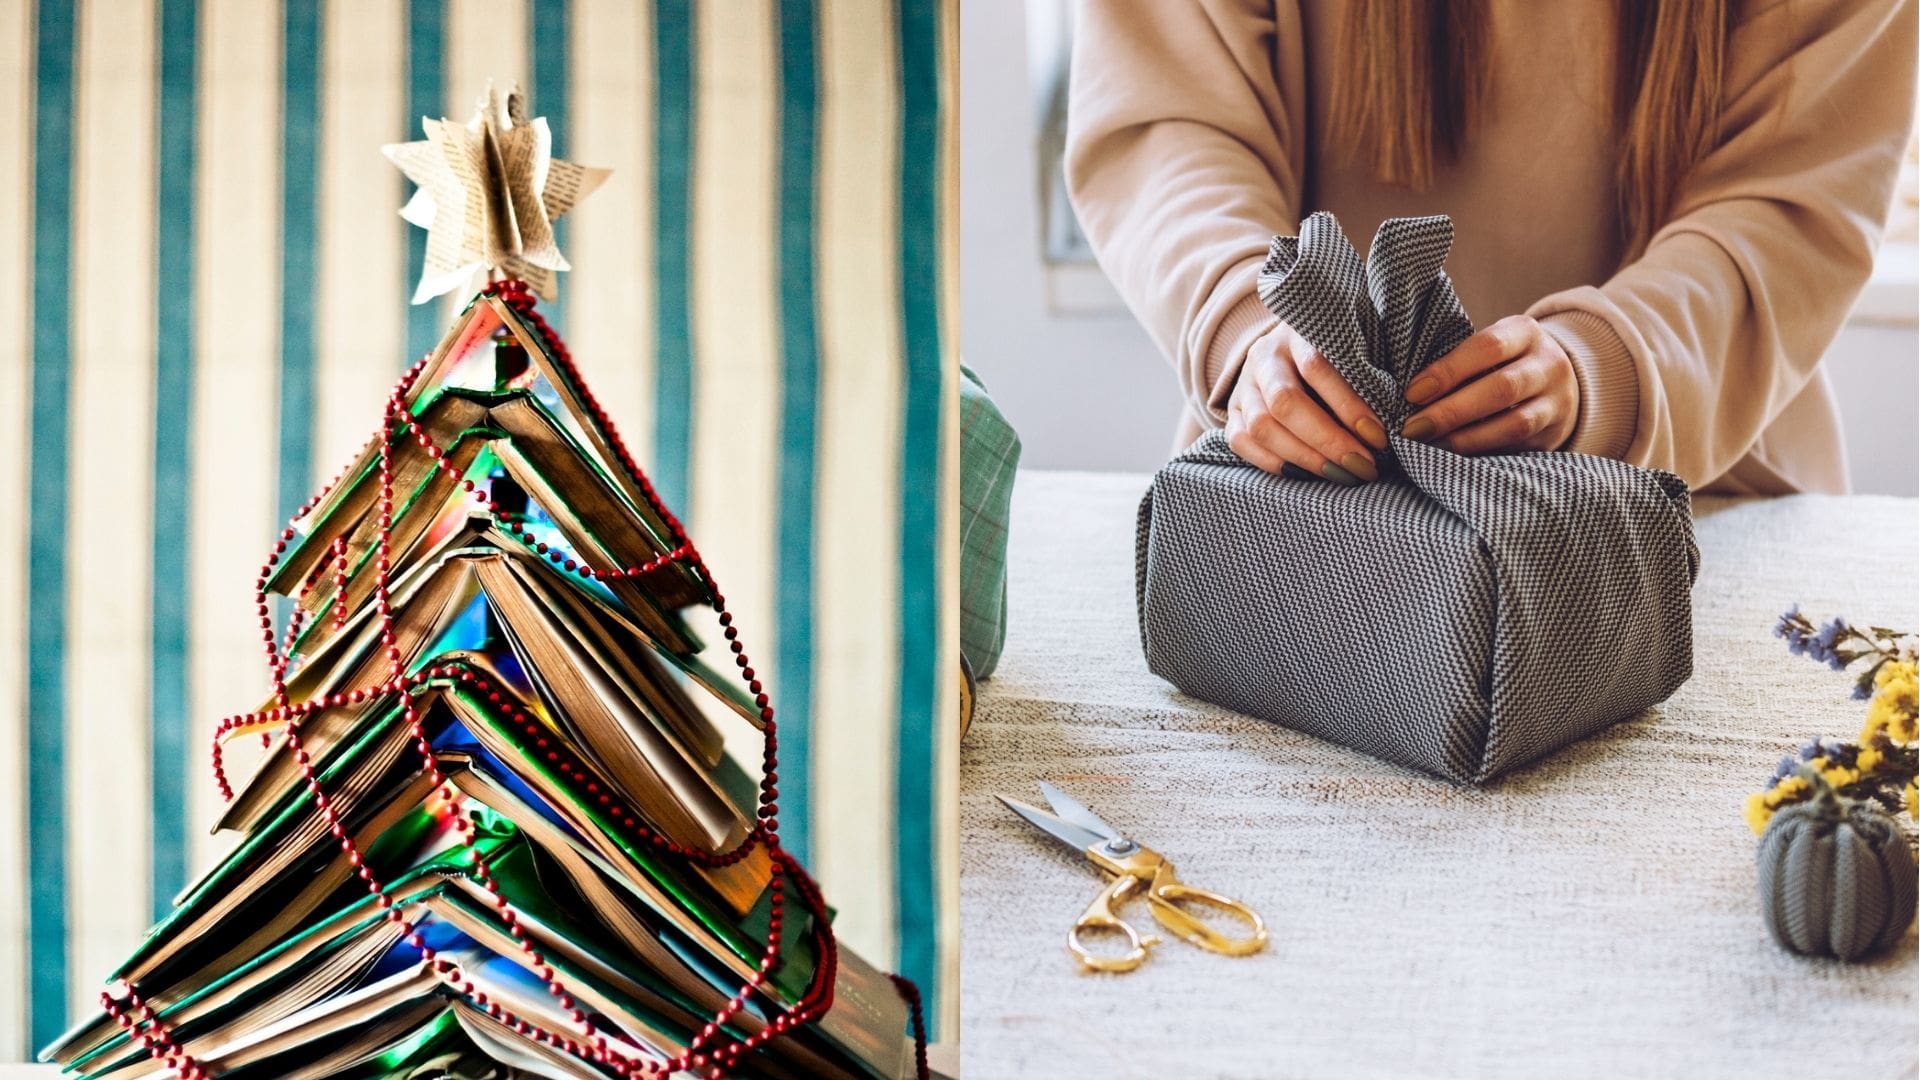 On the left is a stack of books that have been placed to look like a Christmas tree, they’re draped in a red bead garland and there is a green striped background. On the right, a pair of women’s hands fold cloth to wrap a gift.